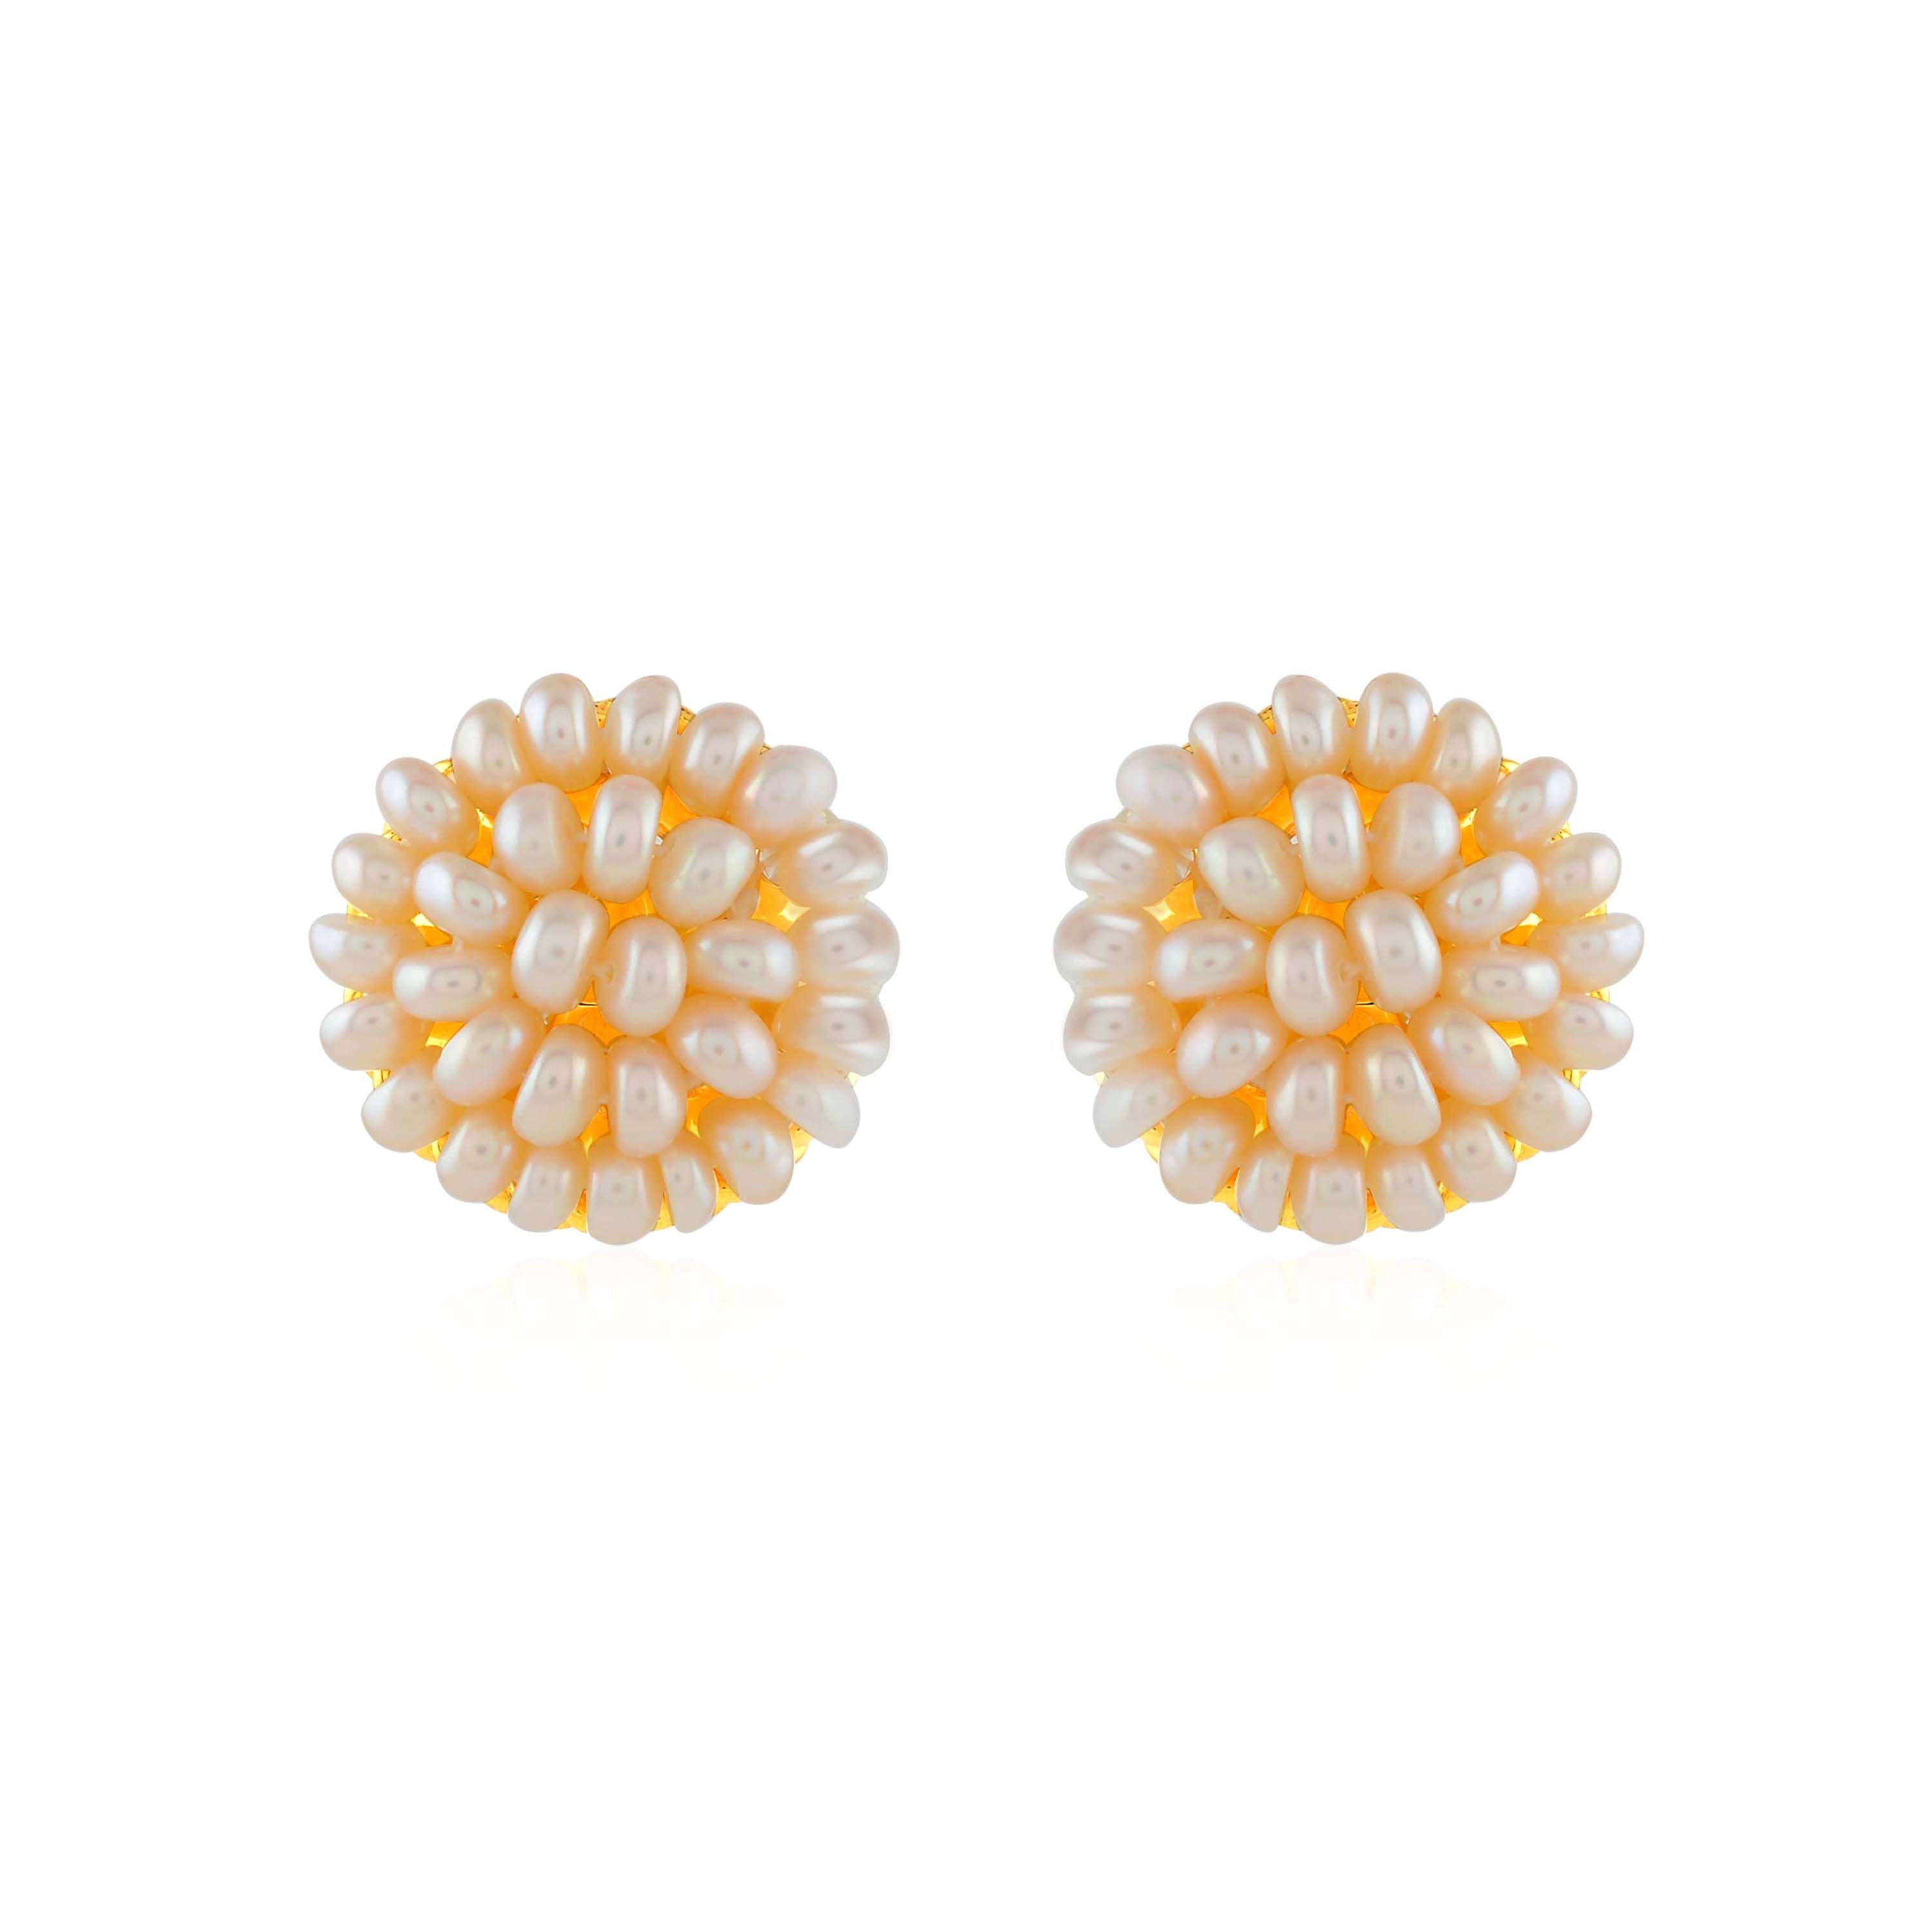 Handcrafted Intricacies Pearl Studs Earrings